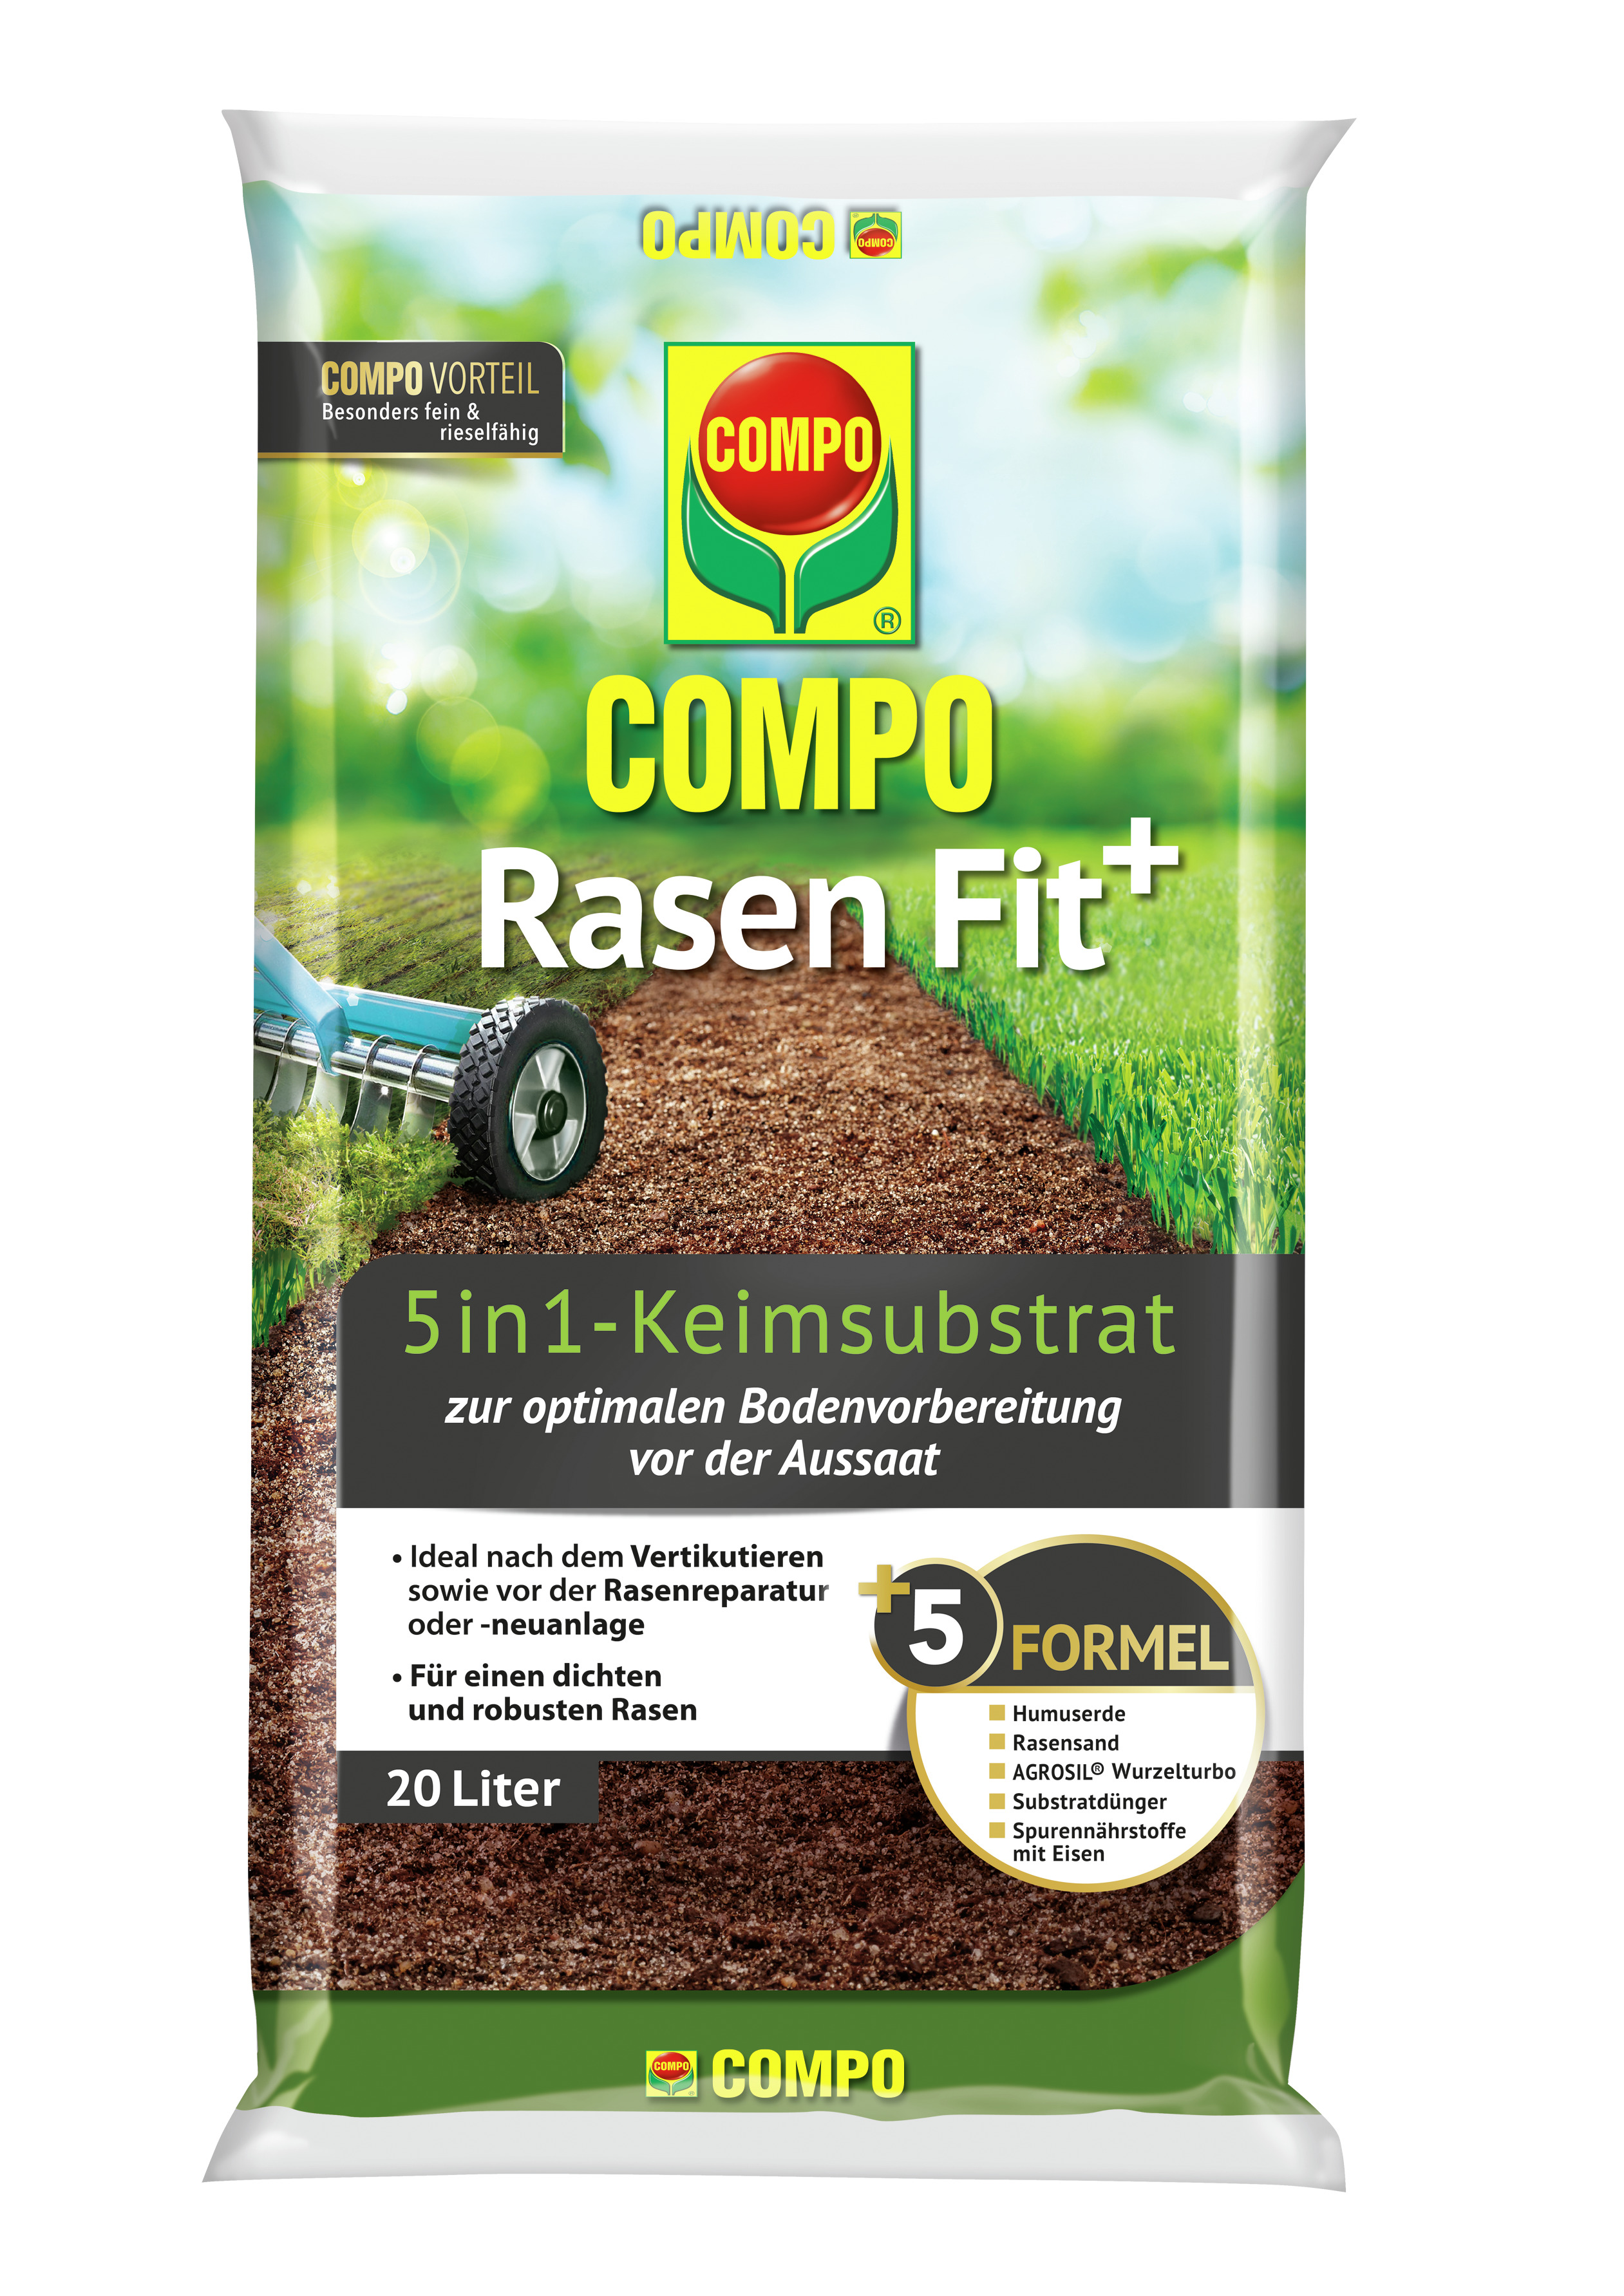 COMPO Rasen Fit 5 in 1 Keimsubstrat 20 Liter